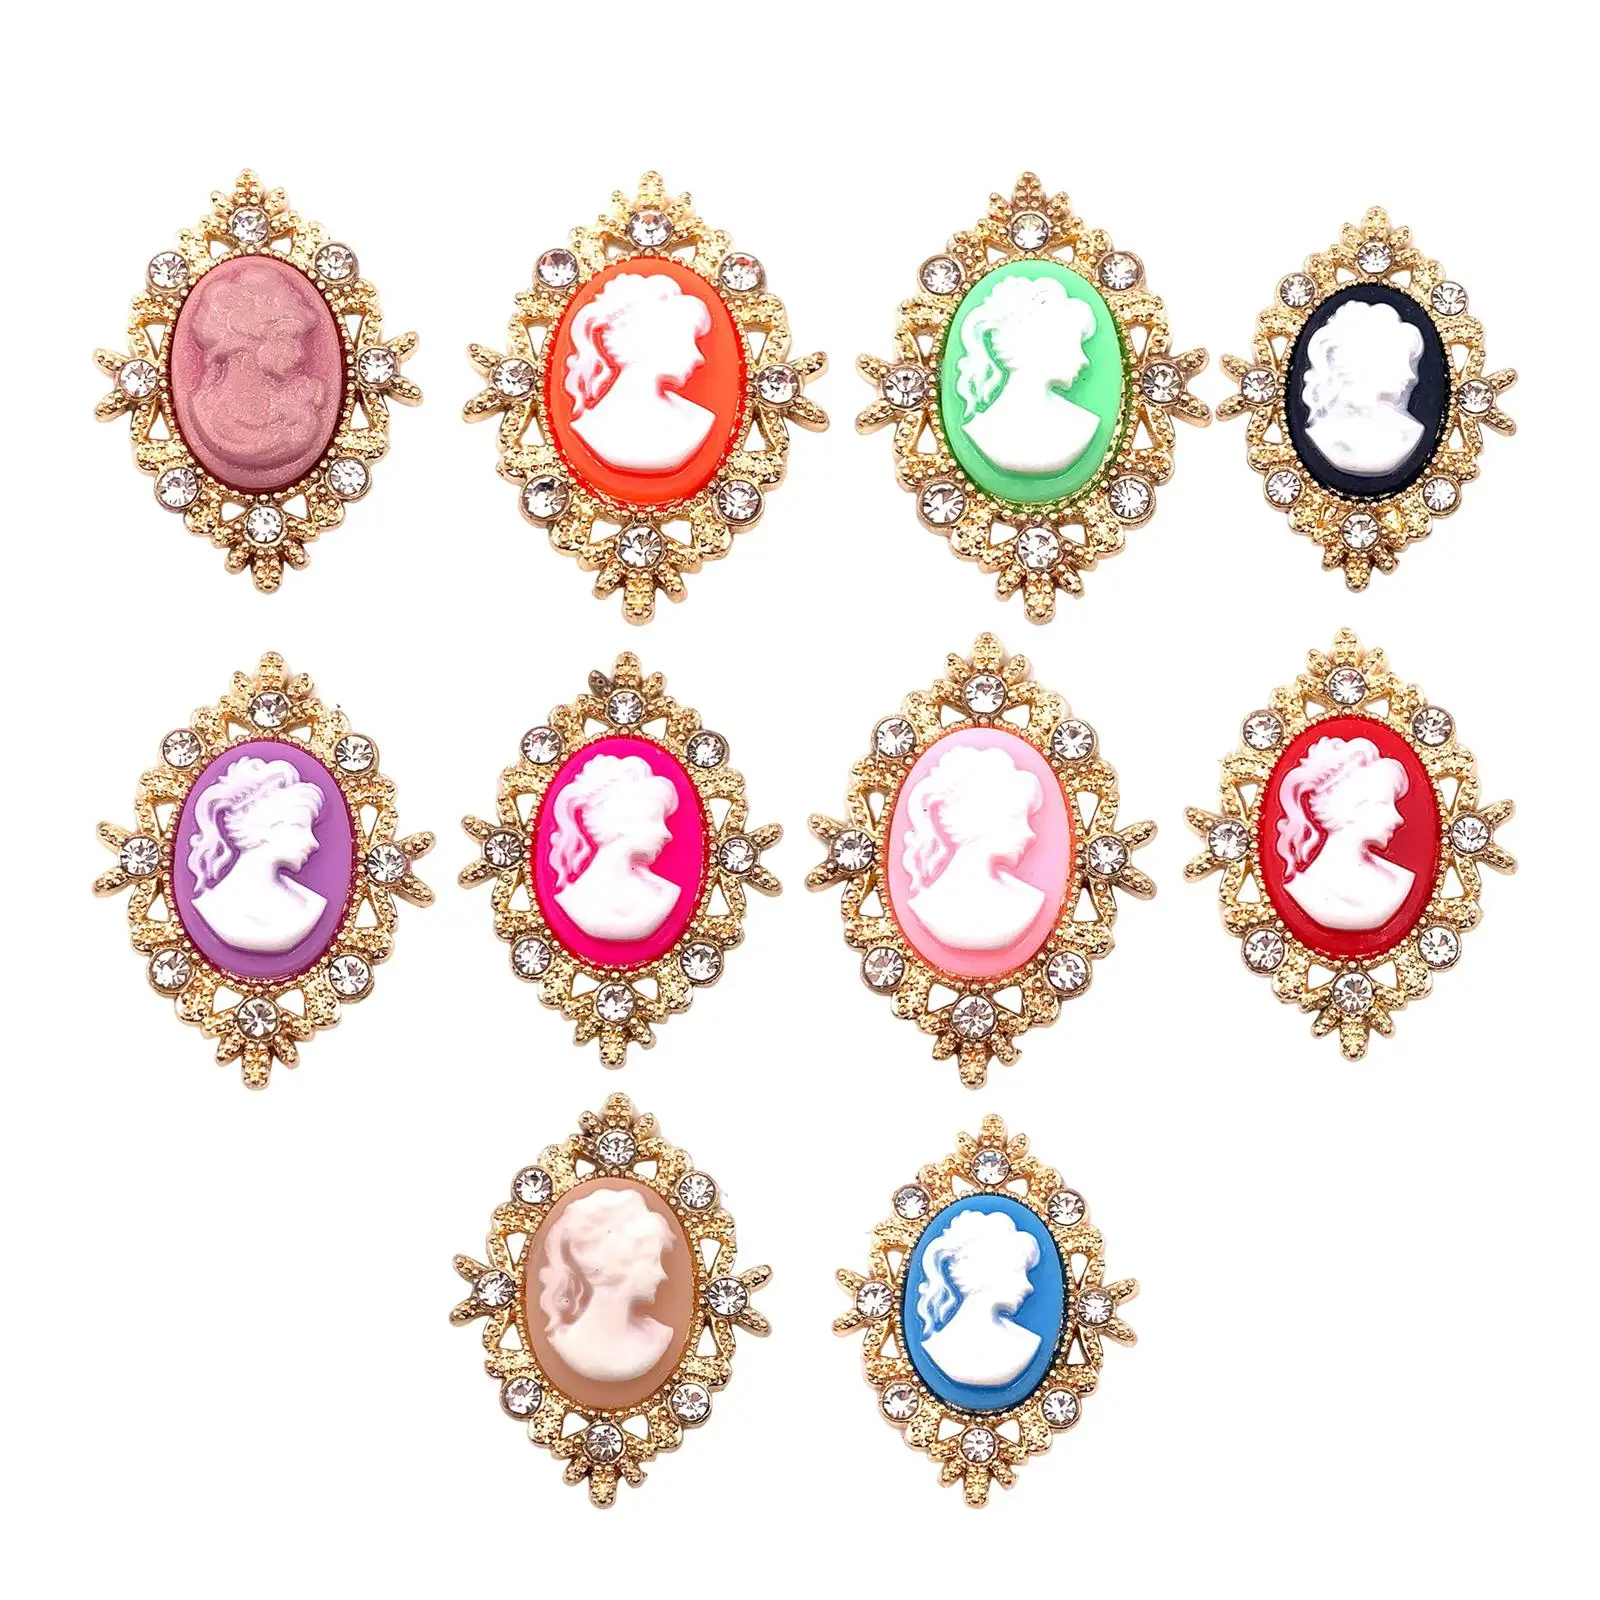 10x Rhinestone Buttons Decor Pendant for Sewing Apparel Accessories Clothing